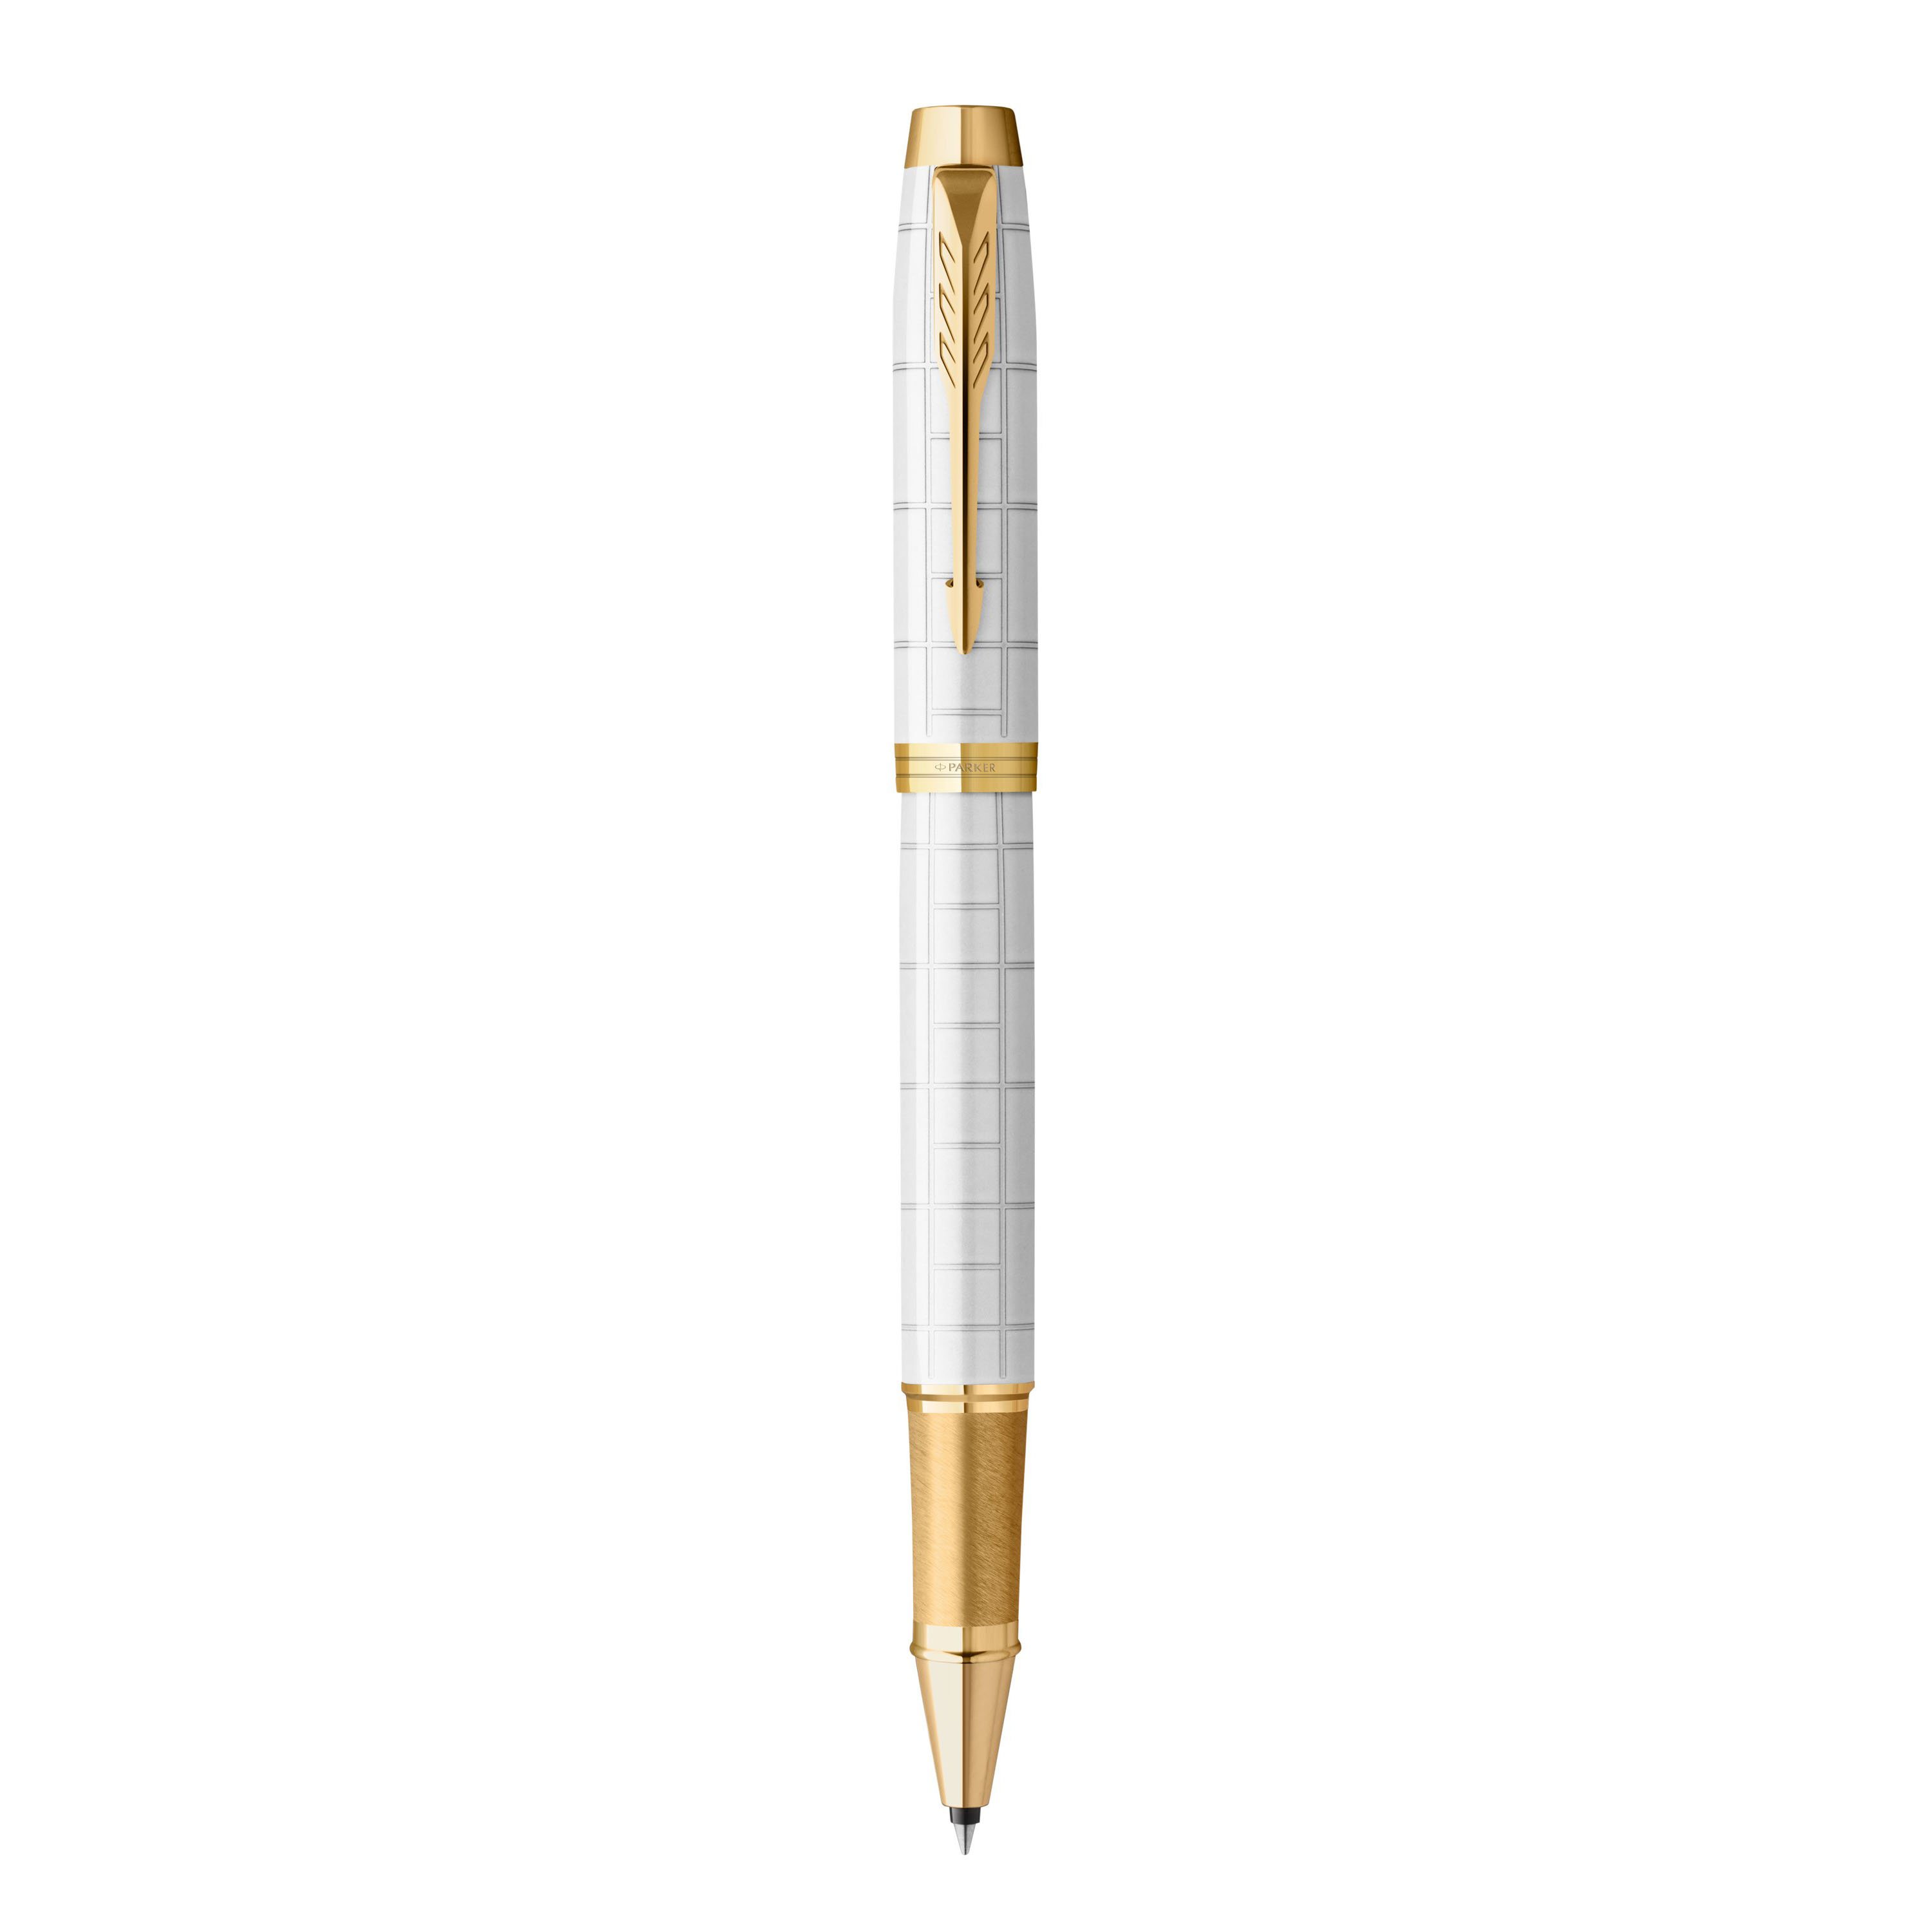 PARKER PREMIER DELUXE SILVERY ST ROLLER BALL S0887990